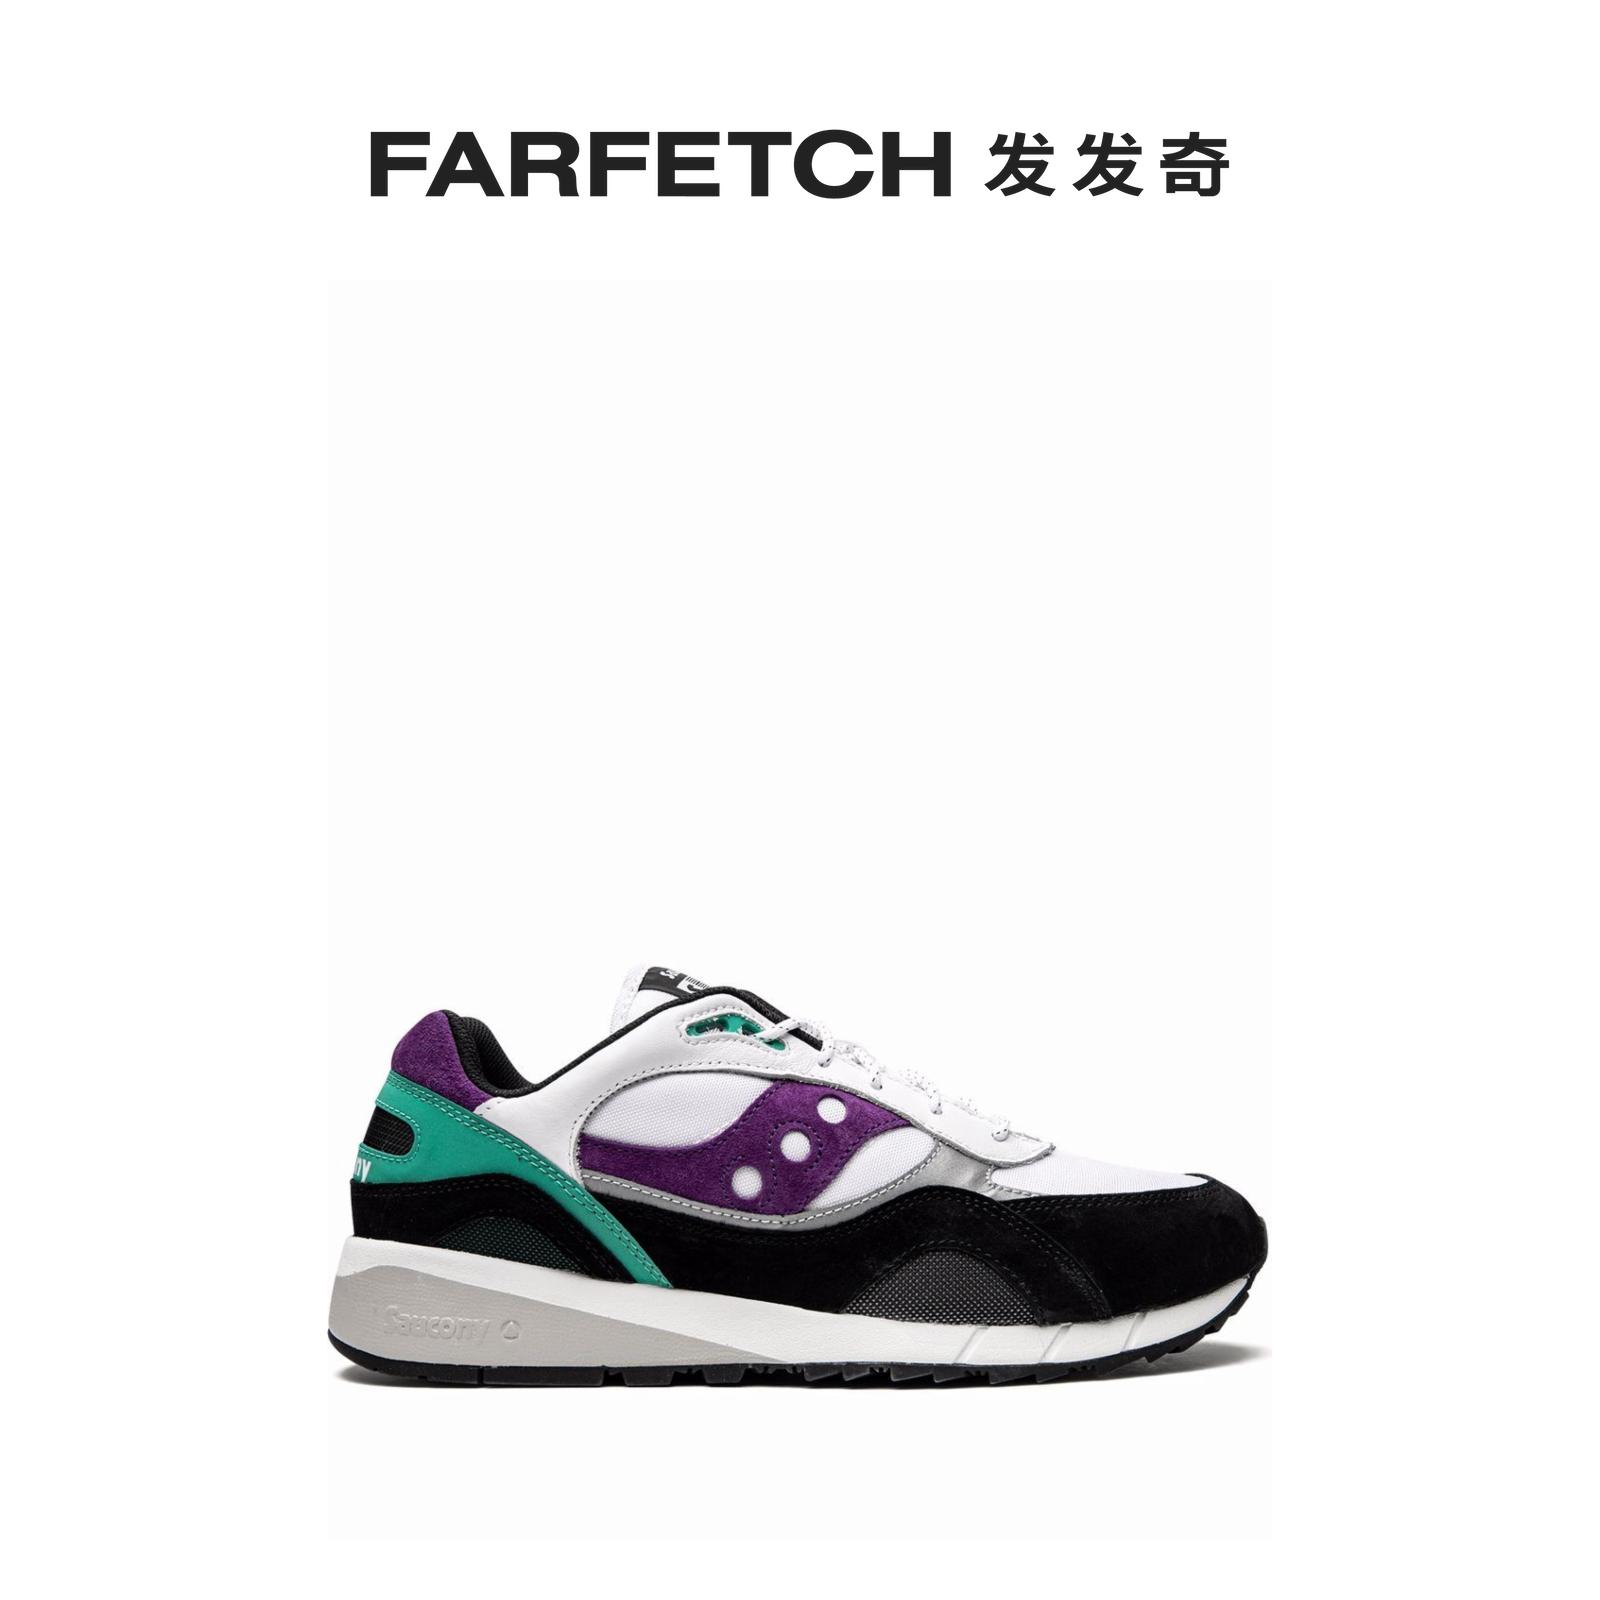 Saucony男士Shadow 6000 Into The Void 运动鞋FARFETCH发发奇